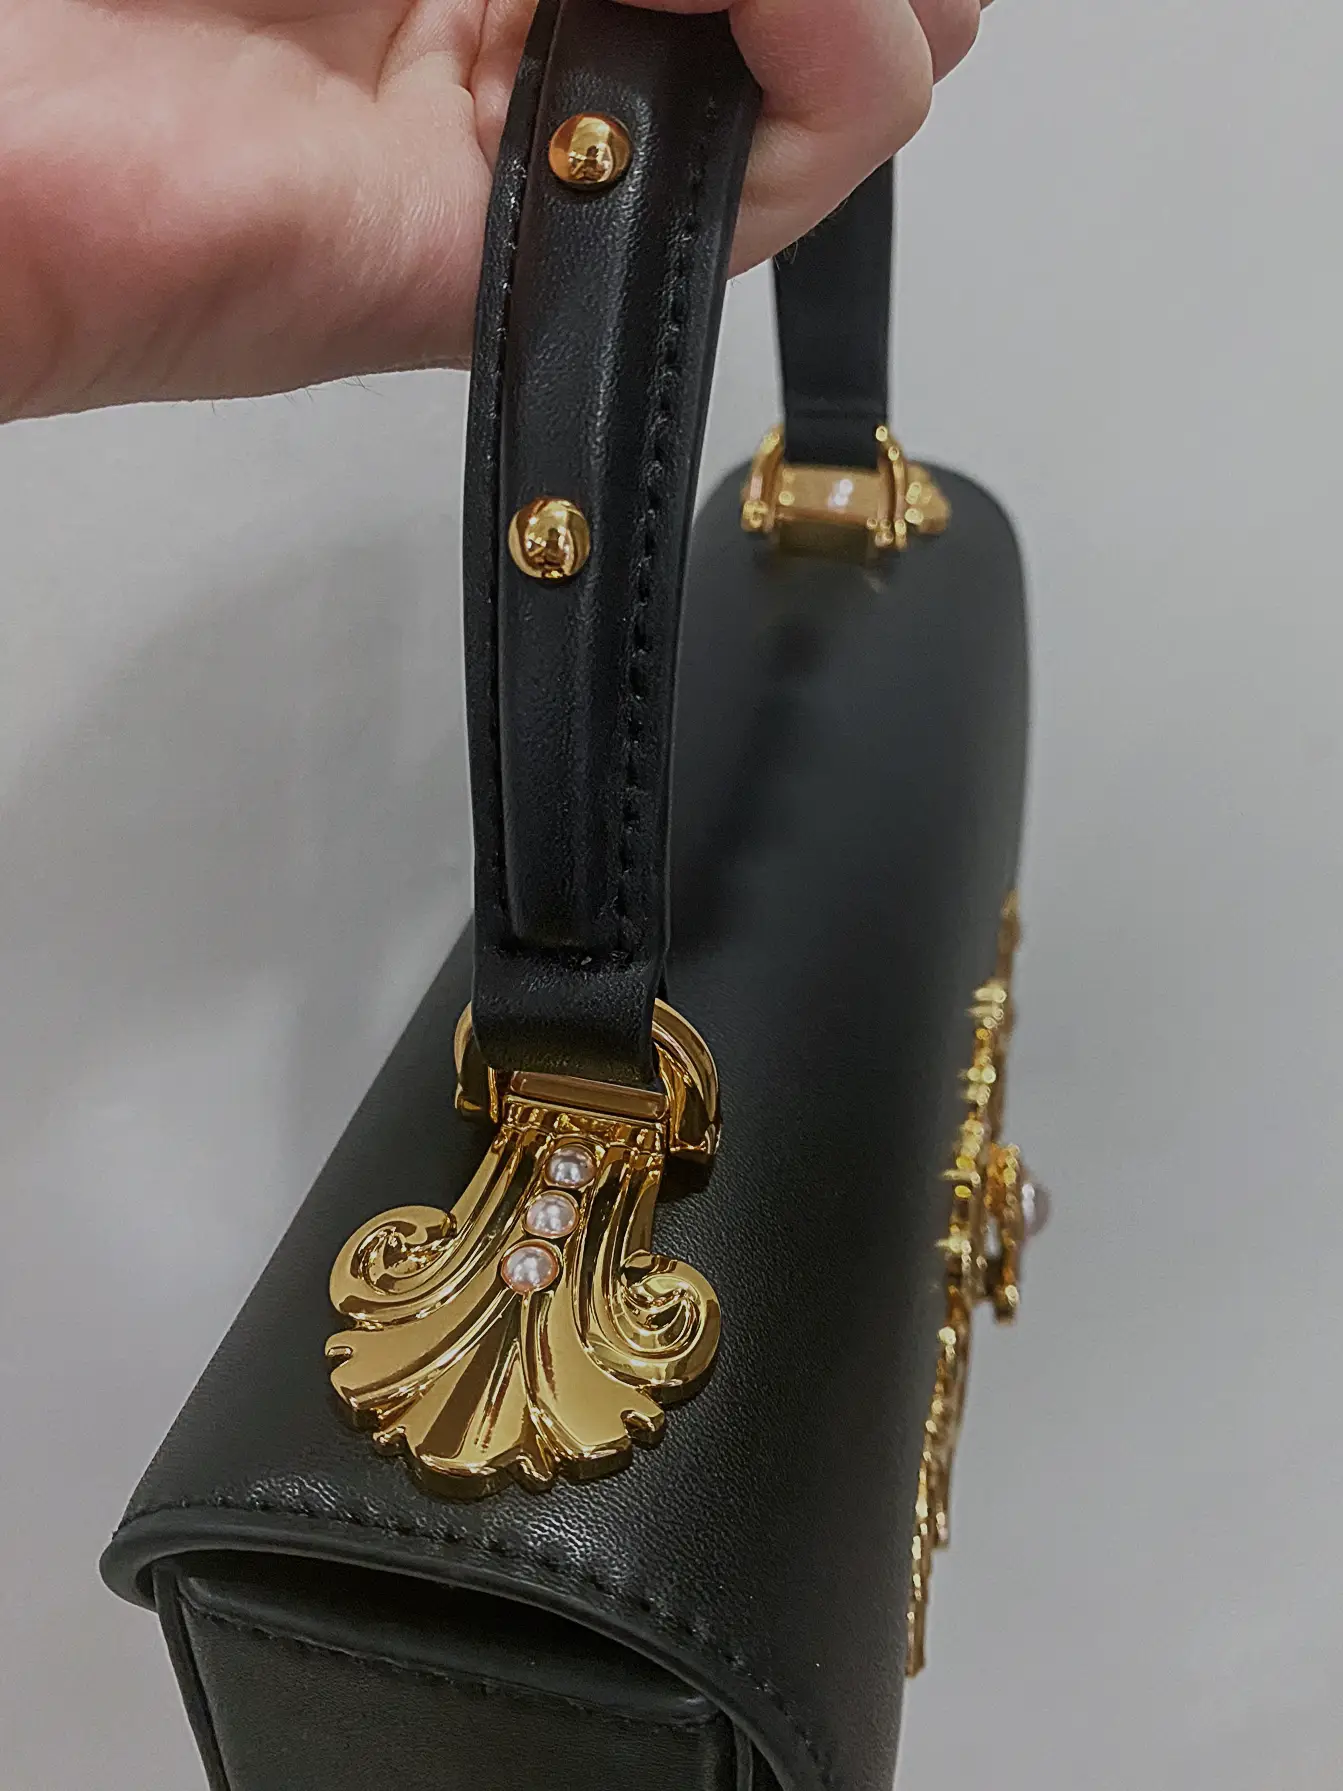 Dolce & Gabbana Miss Sicily unboxing Large and comparison to